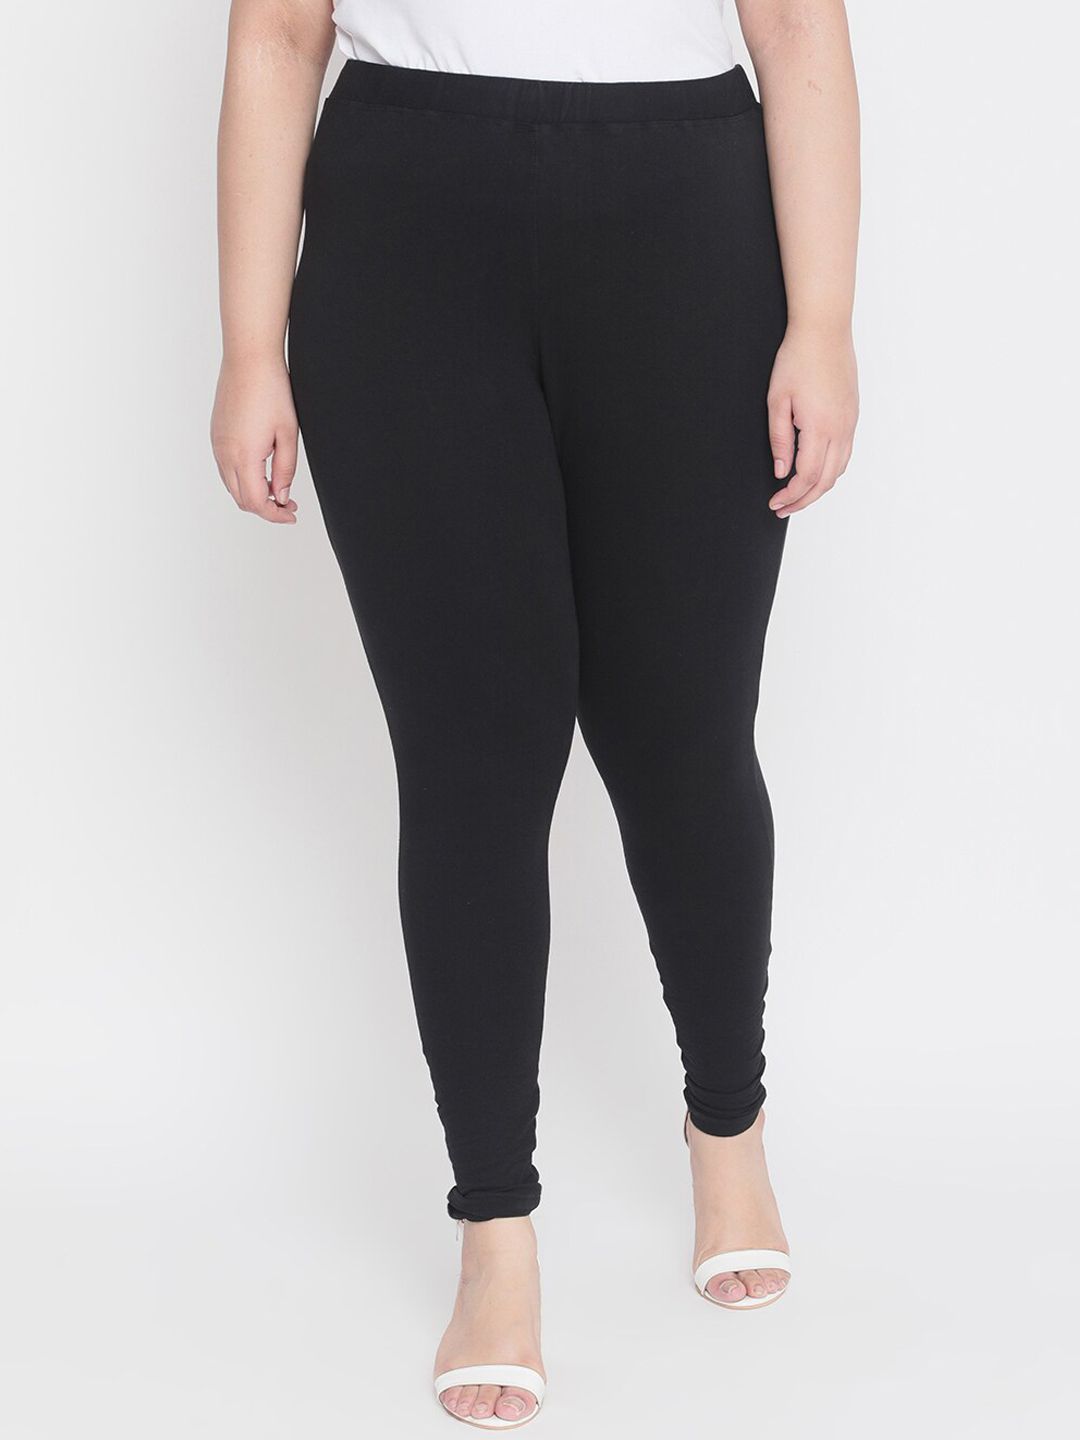 Amydus Women Plus Size Black Solid Ankle-Length Leggings Price in India